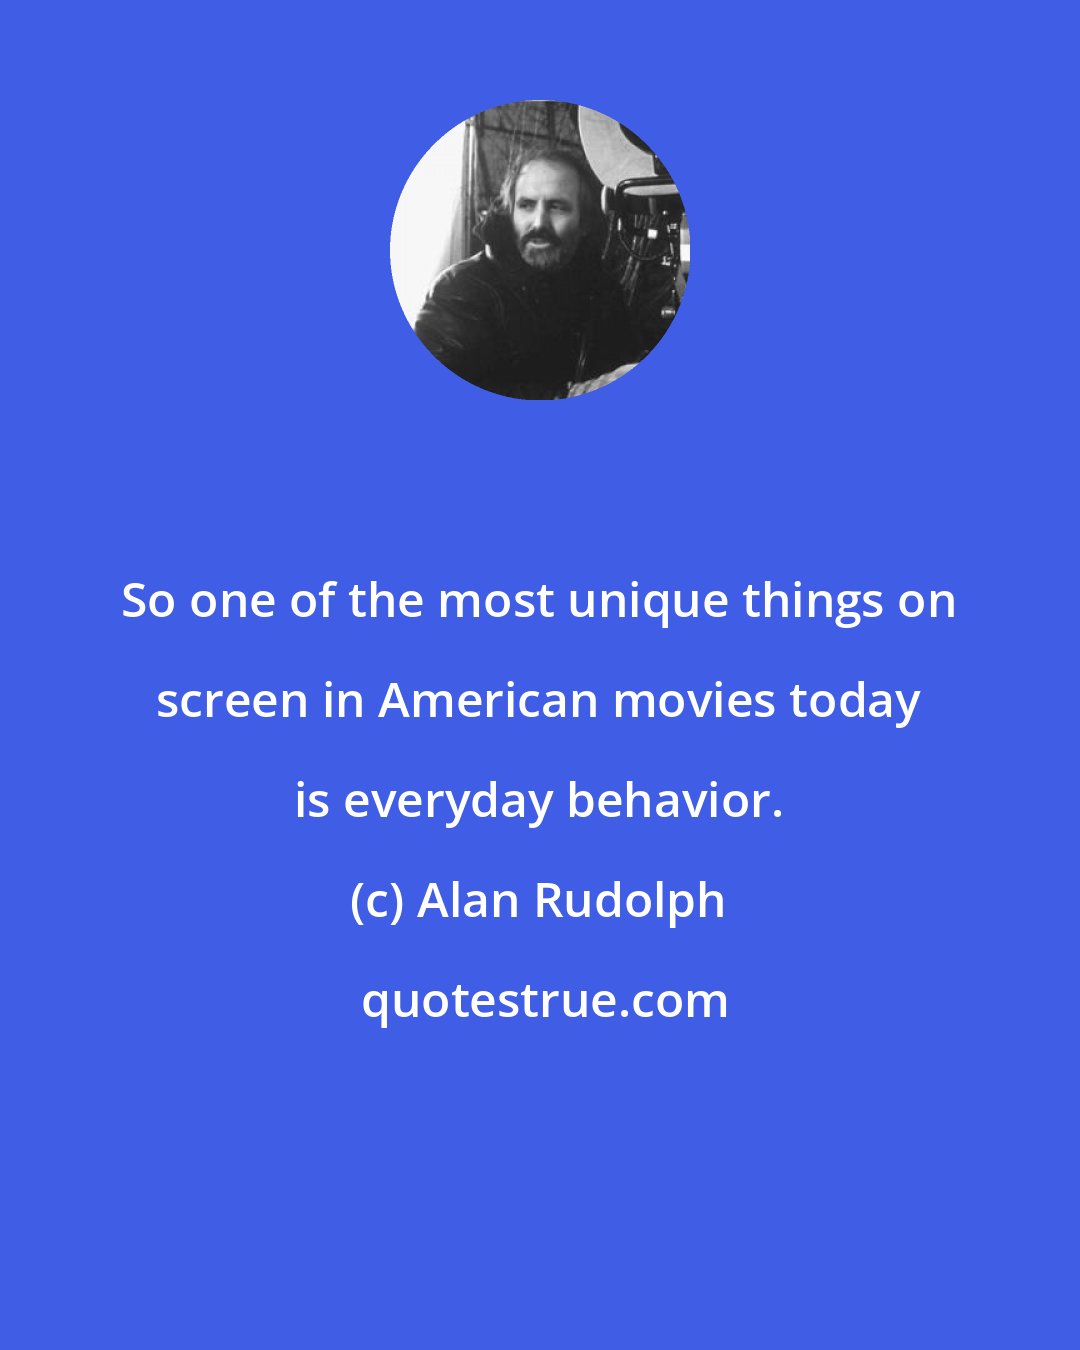 Alan Rudolph: So one of the most unique things on screen in American movies today is everyday behavior.